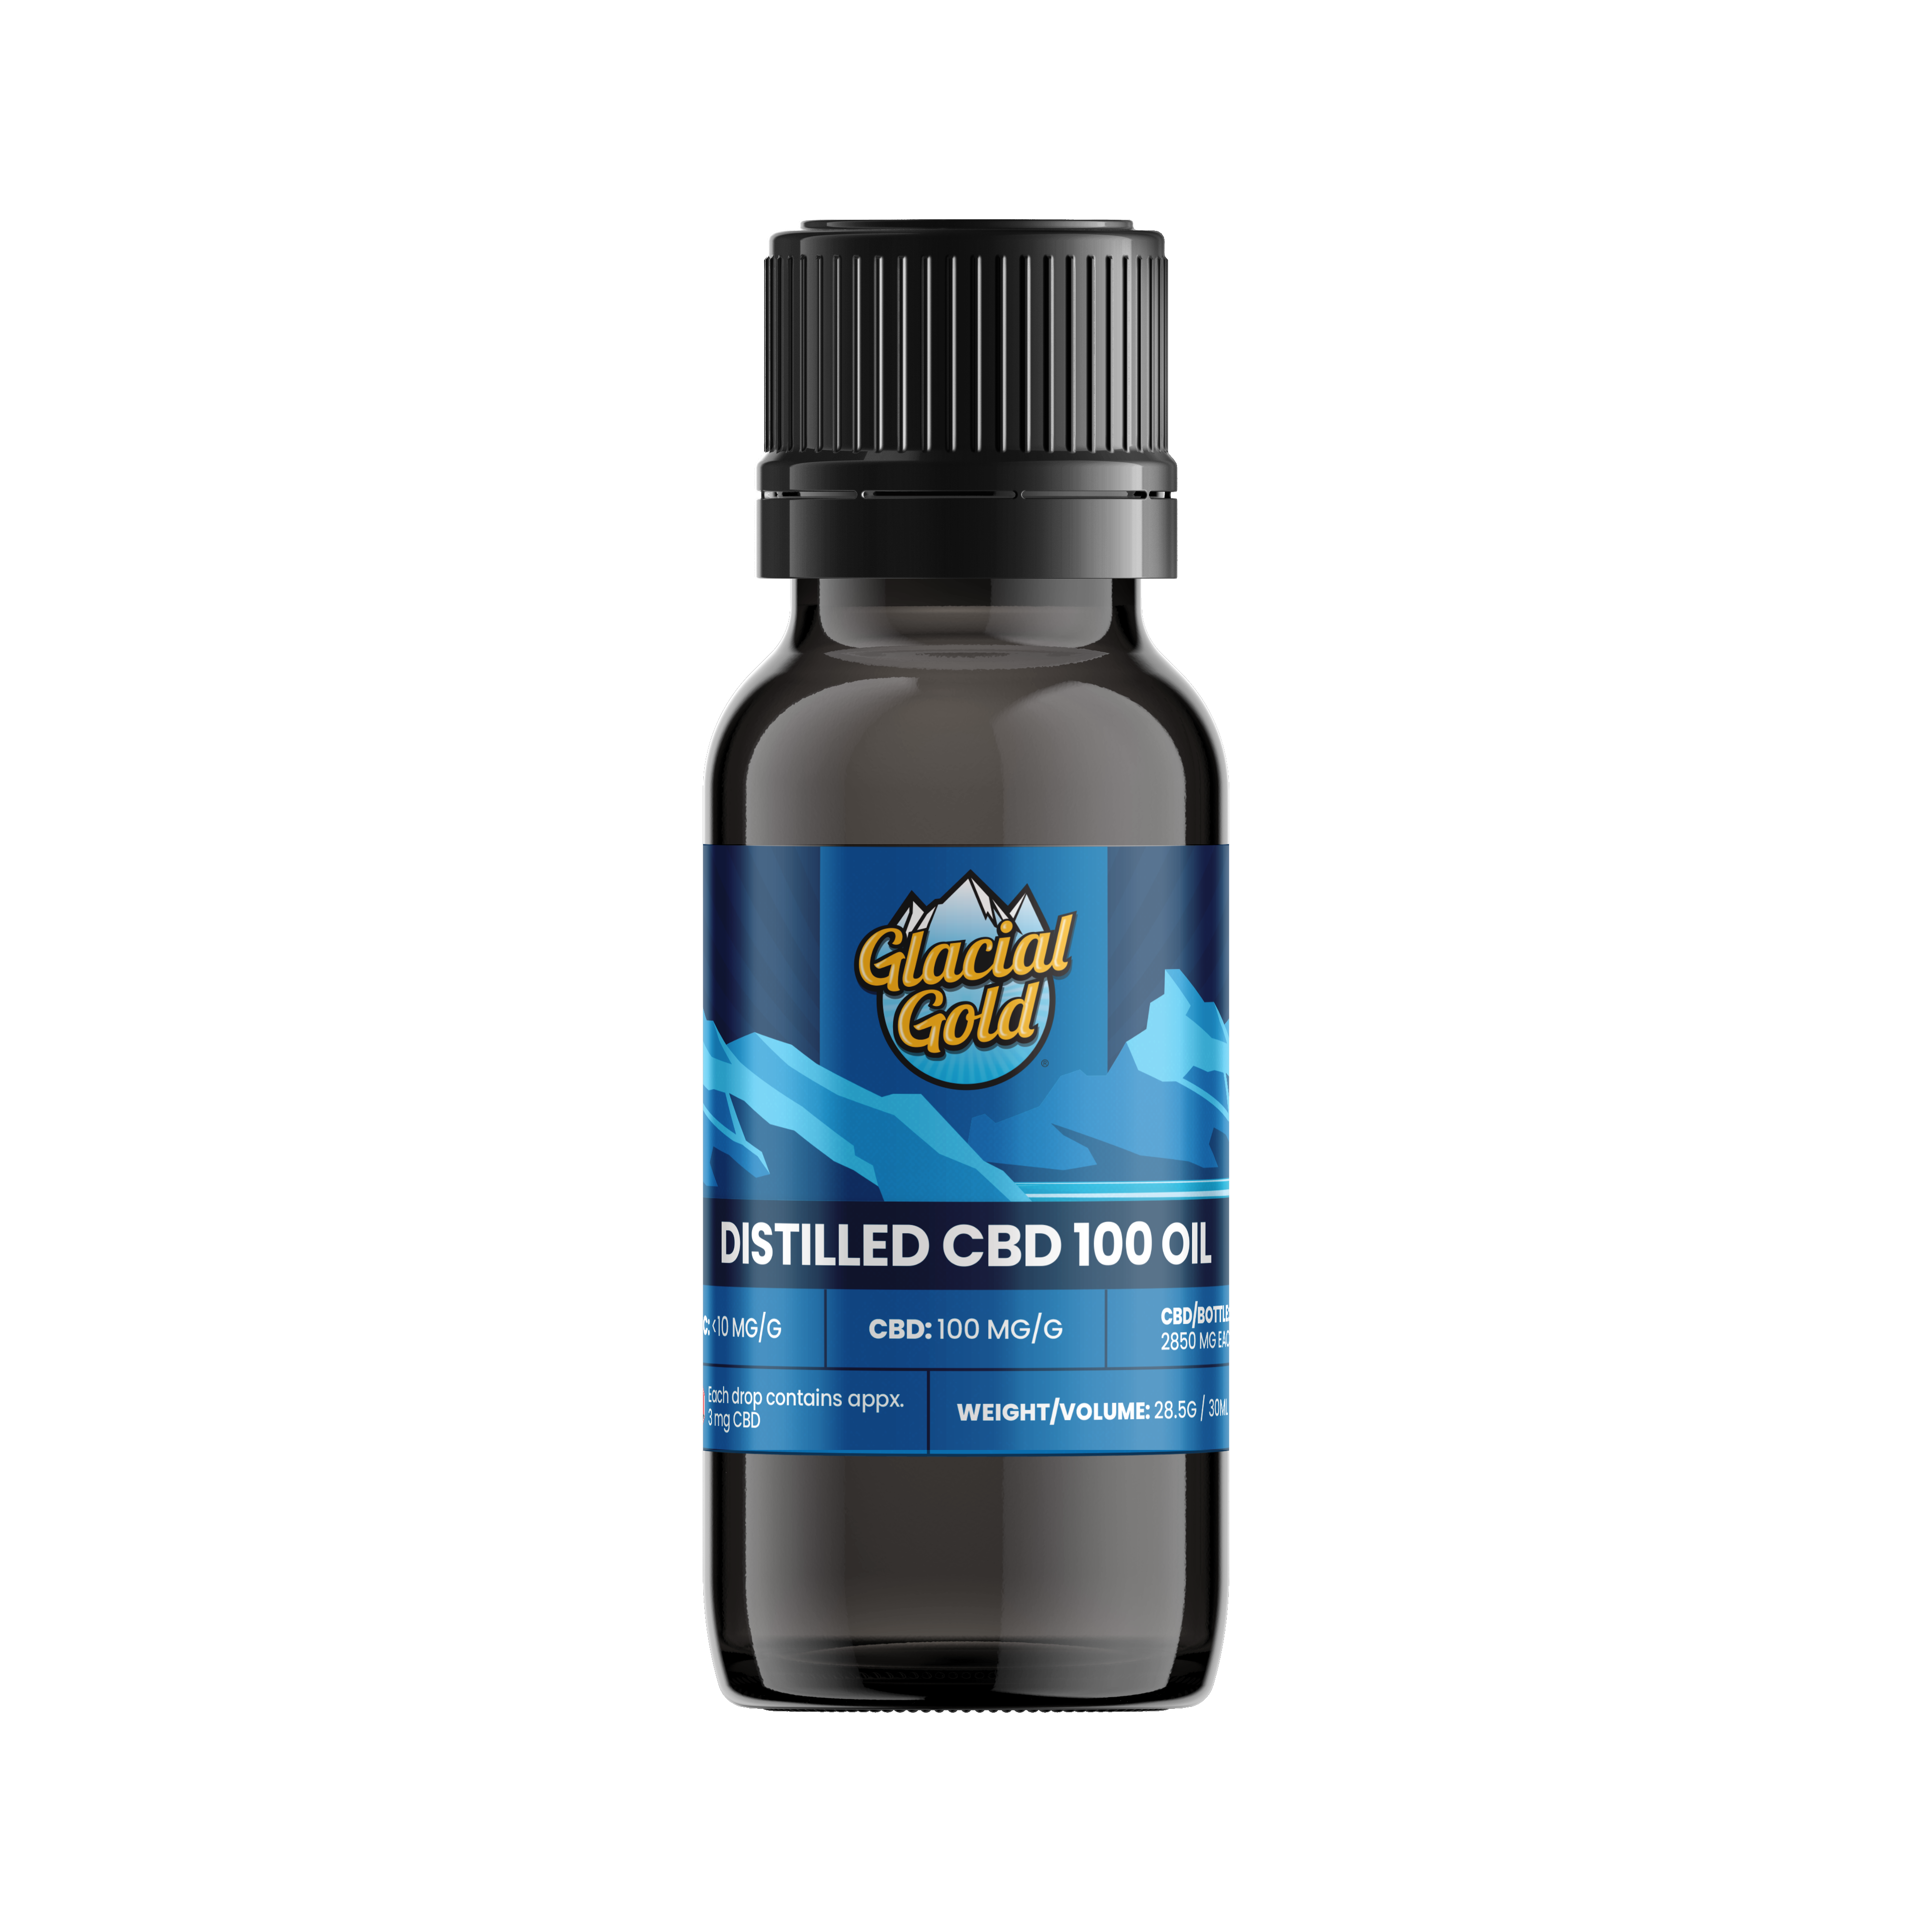 Cannabis Product Distilled CBD 100 Oil by Glacial Gold